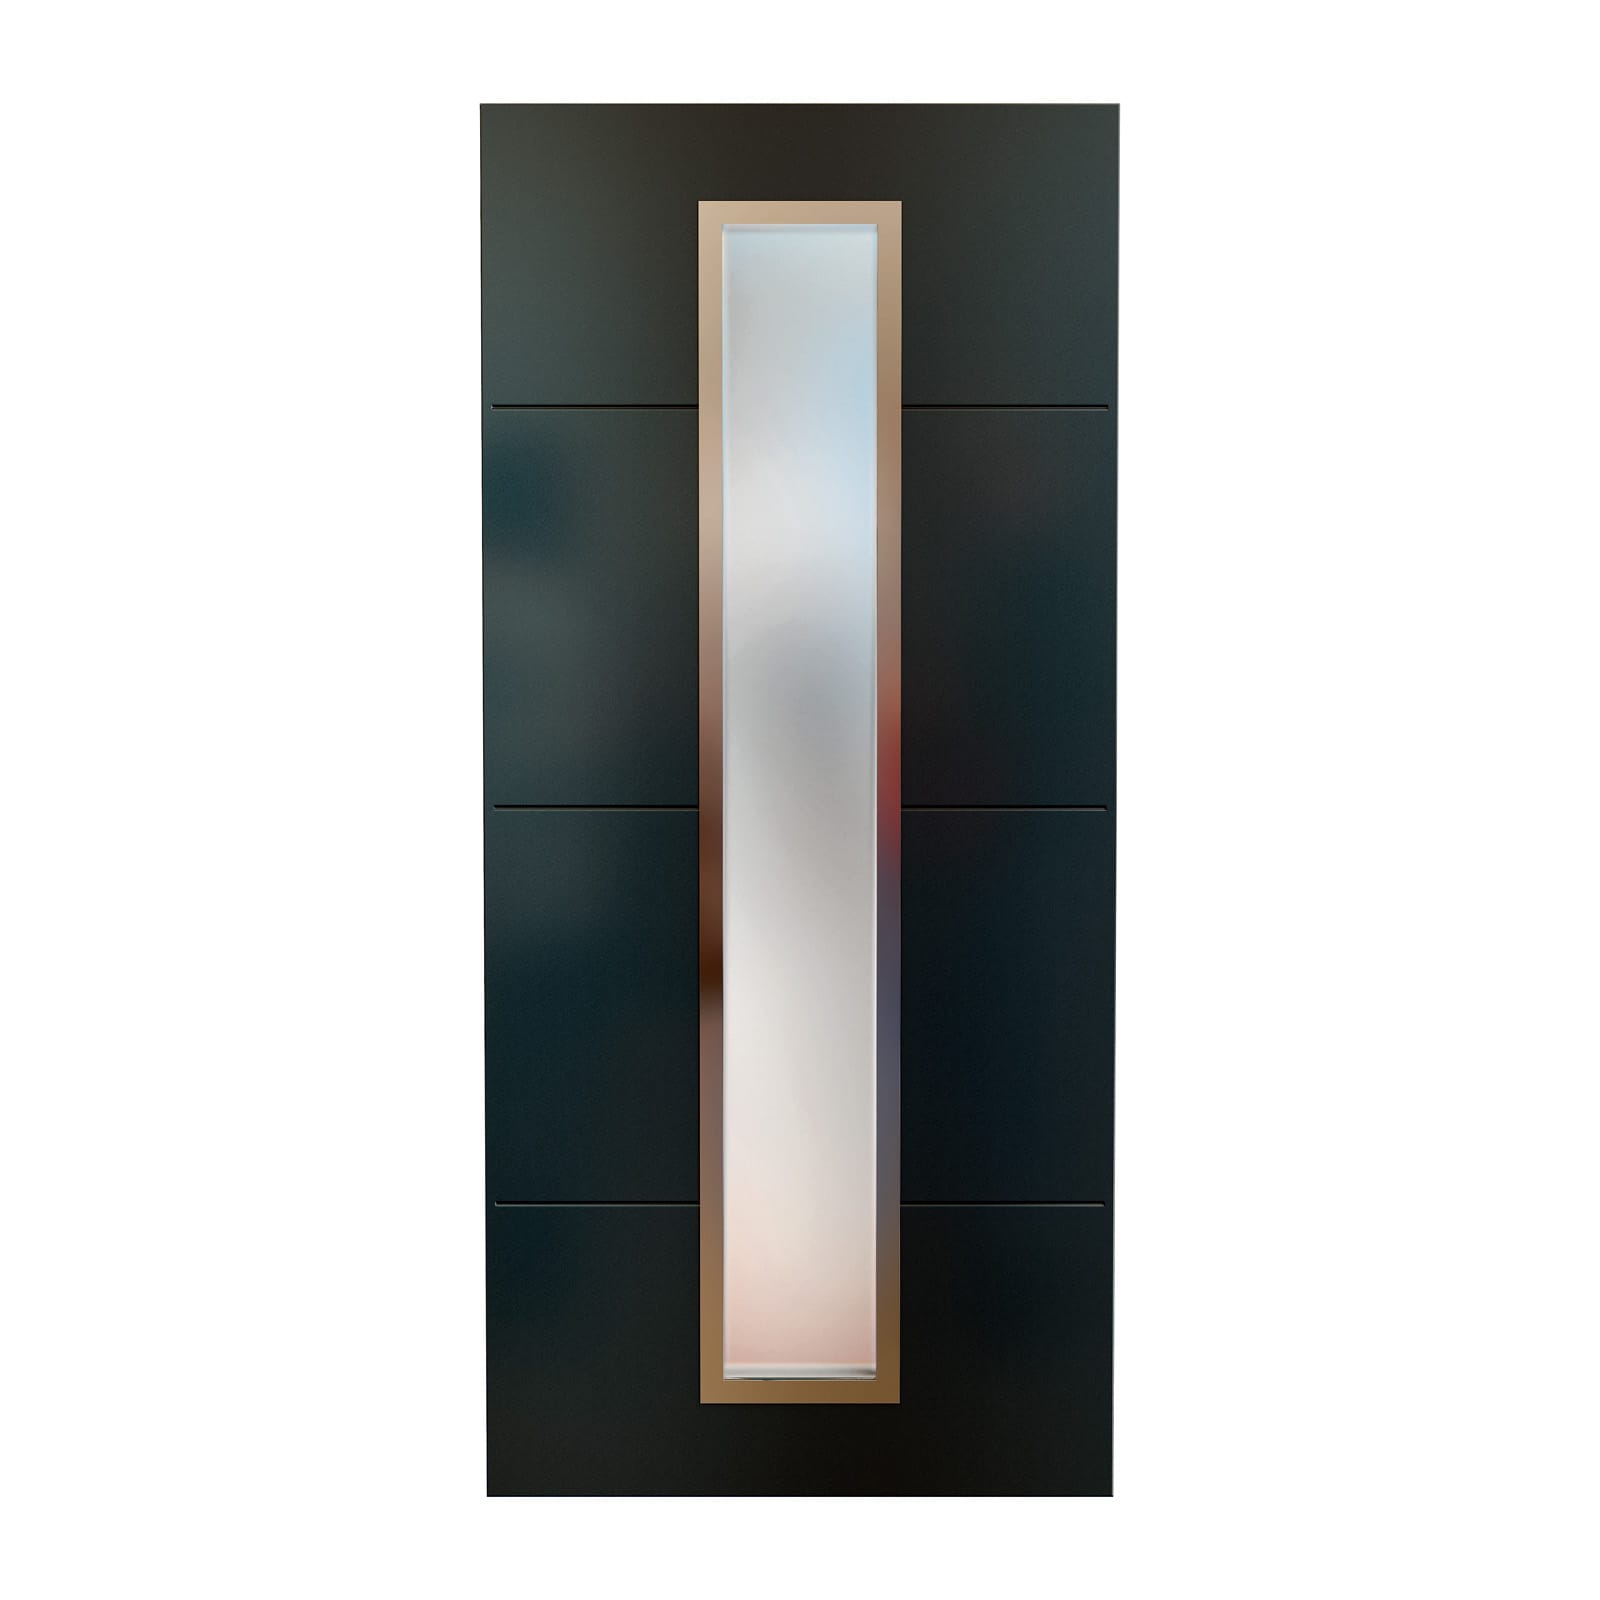 Alitherm 400 Door with PM0001P panel